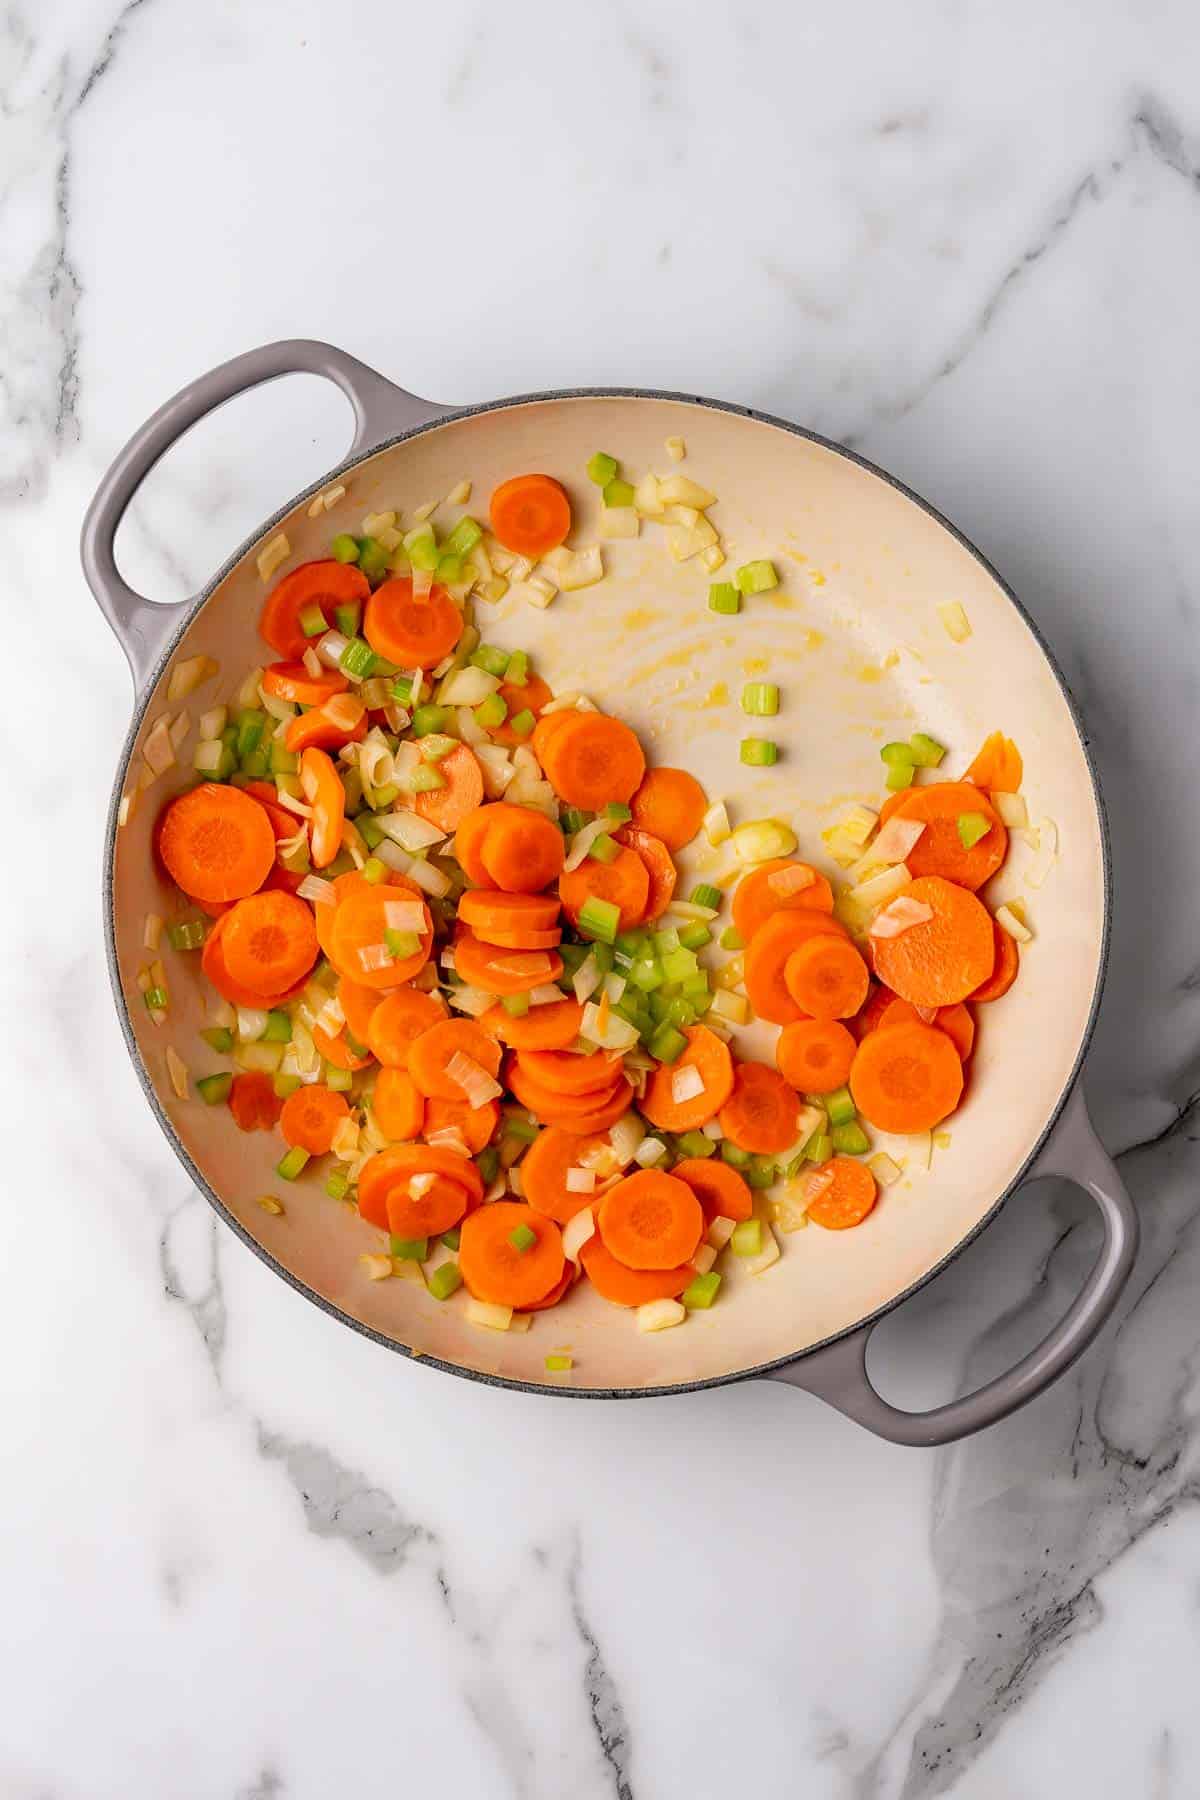 Celery, carrots, and onions browning in a pan